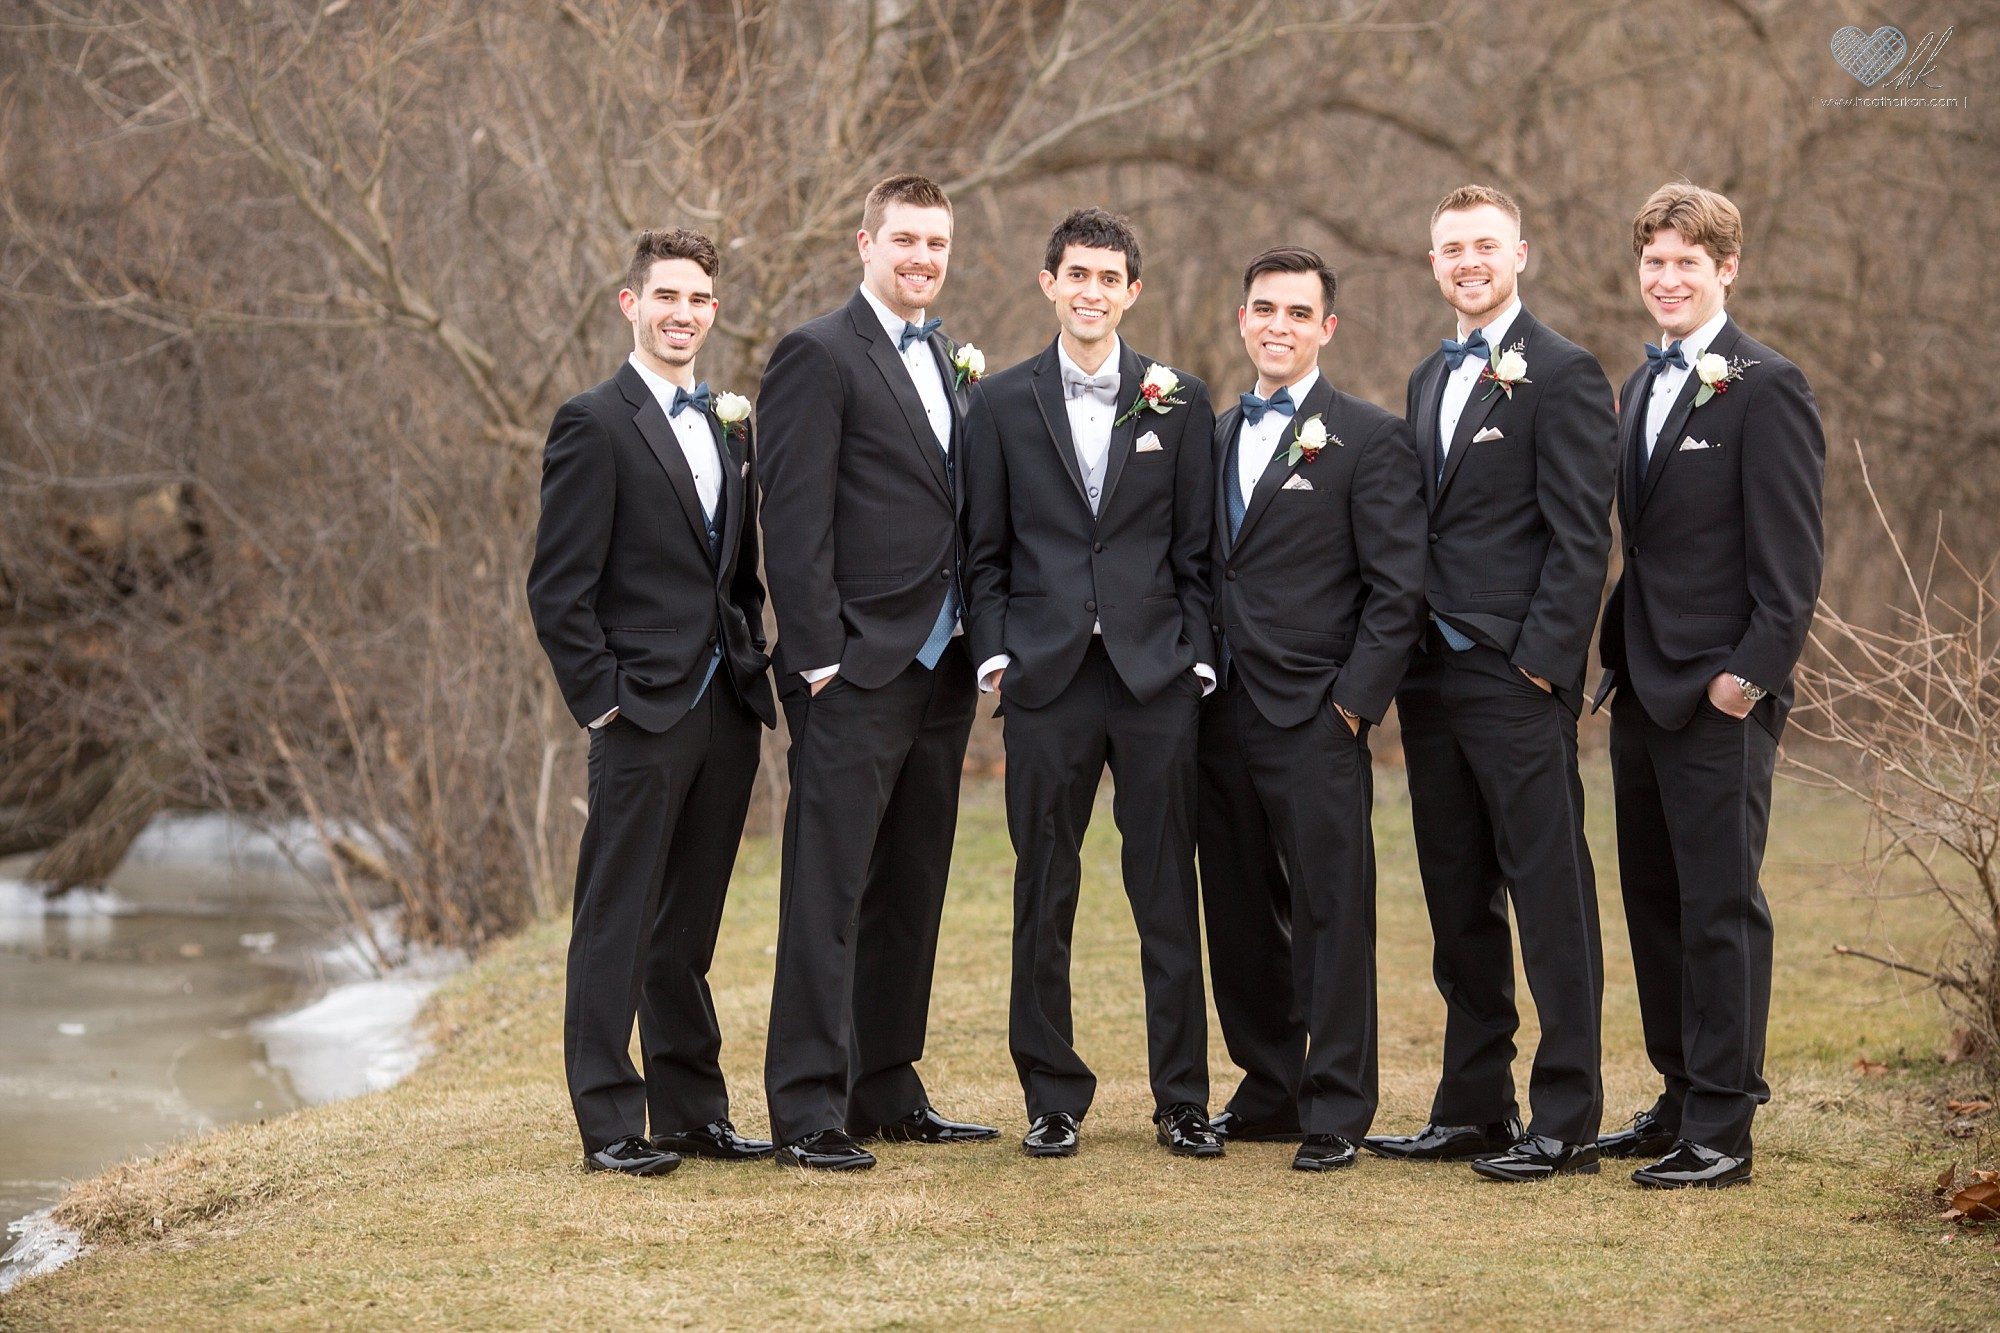 Winter wedding photographs in Plymouth, Michigan